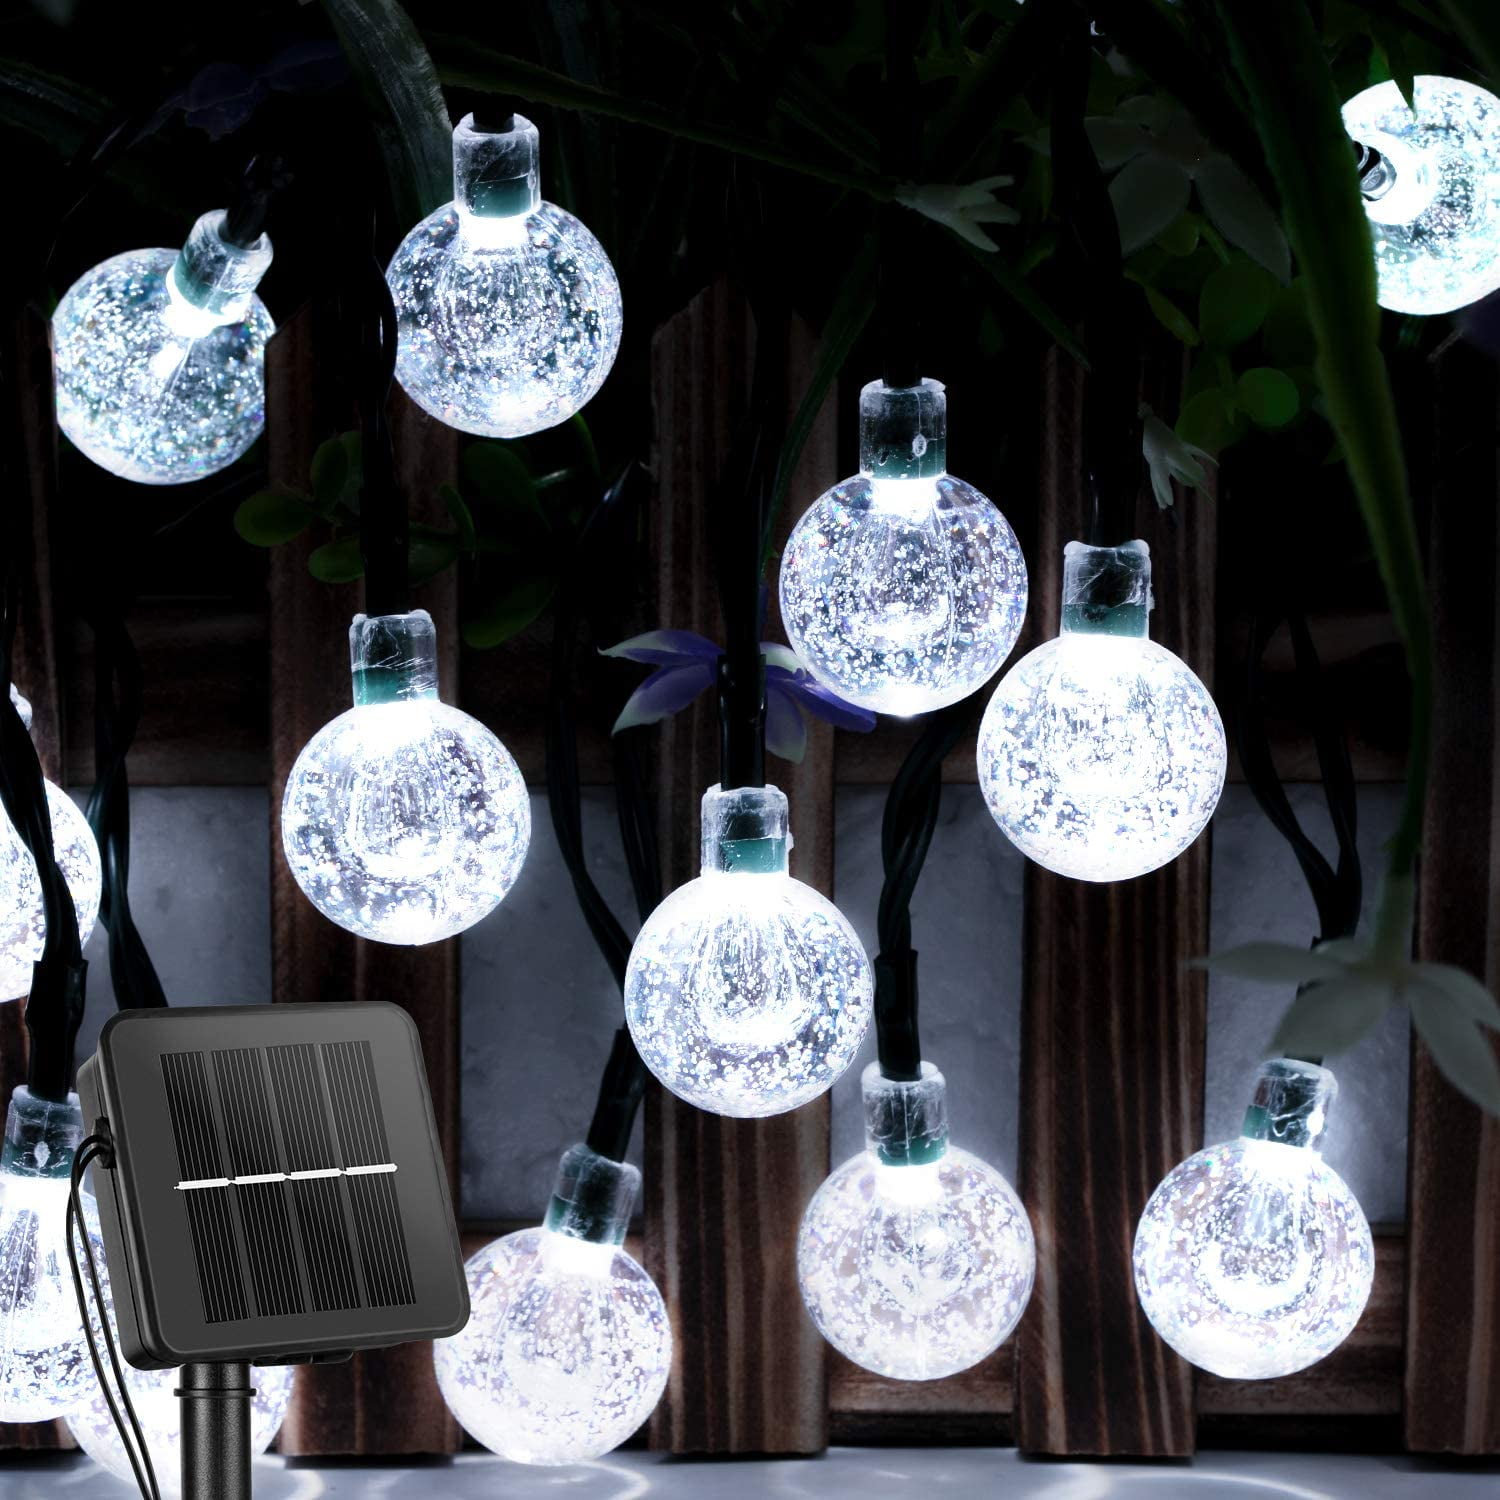 Details about   50LED Solar String Lights Patio Party Yard Garden Wedding Waterproof Outdoor NEW 